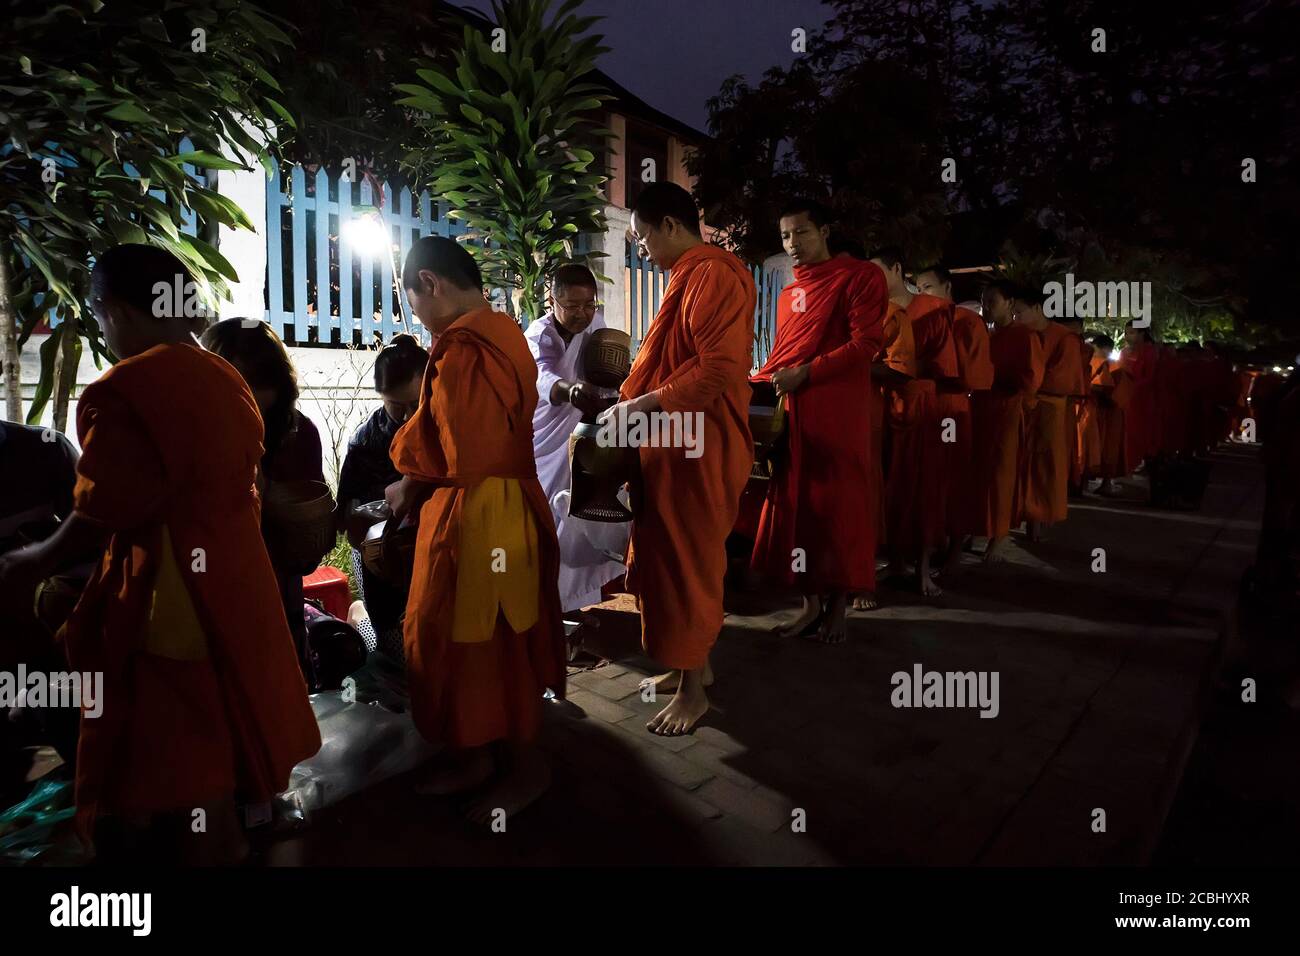 Luang Prabang, Laos - Jun 14, 2019 - Laos Buddhist alms giving sticky rice ceremony in the morning, The tradition of giving alms to monks in Luang Stock Photo